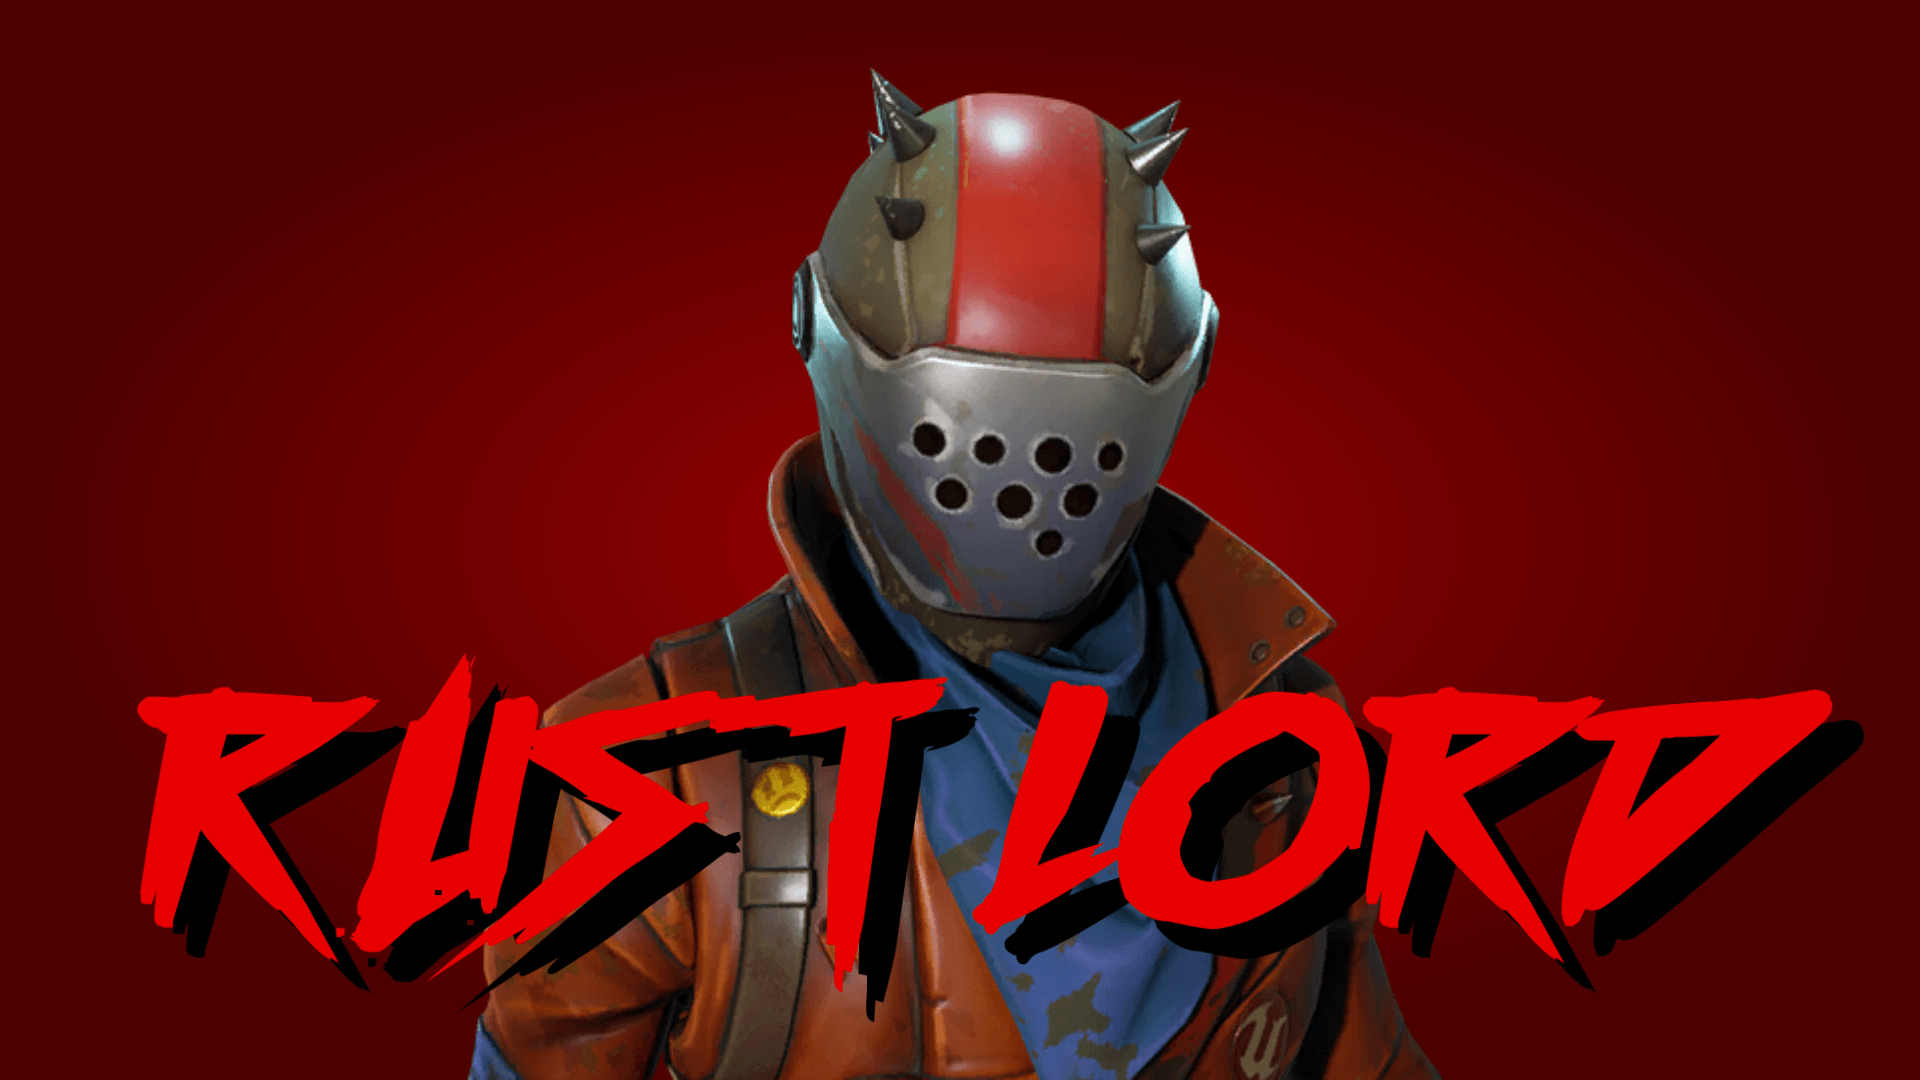 Wallpapers Of Rust Lord From Fortnite